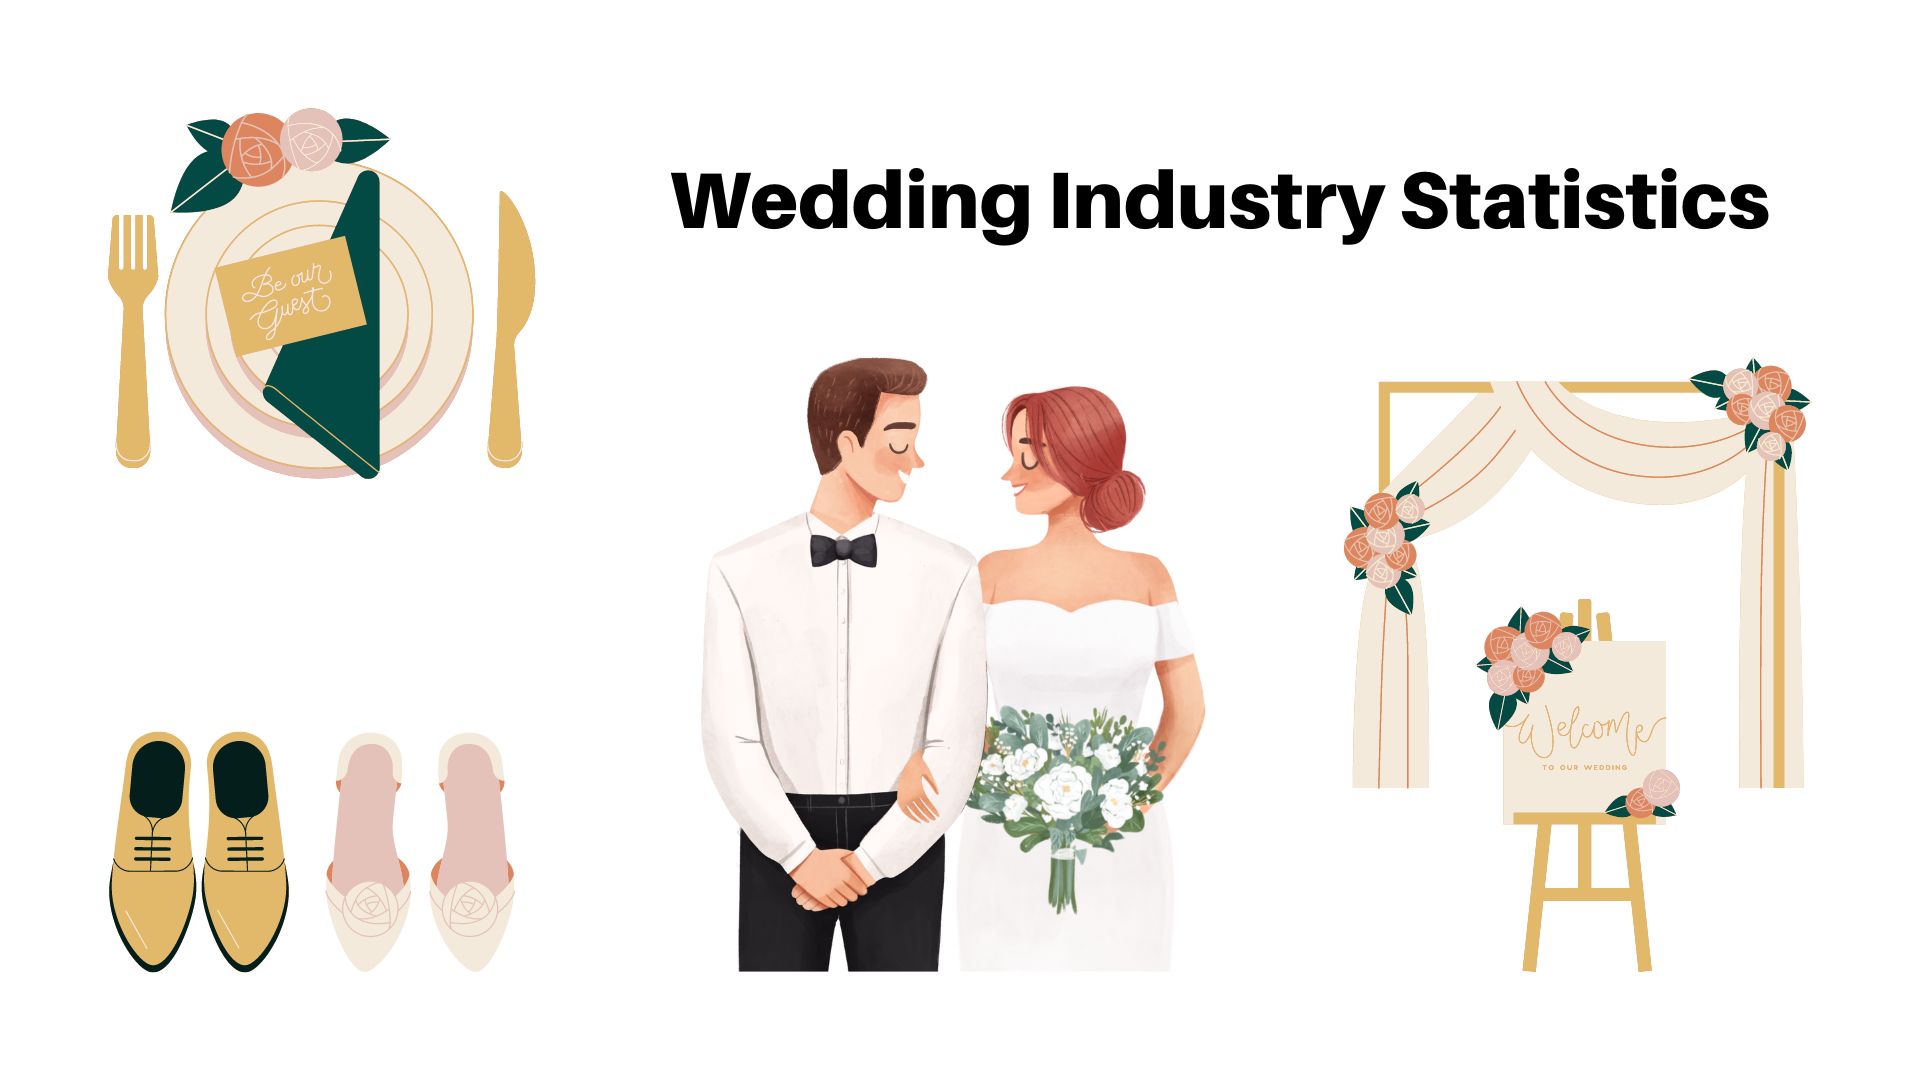 Wedding Industry Statistics – By Traditions, Demographic, Places, Seasons or Time